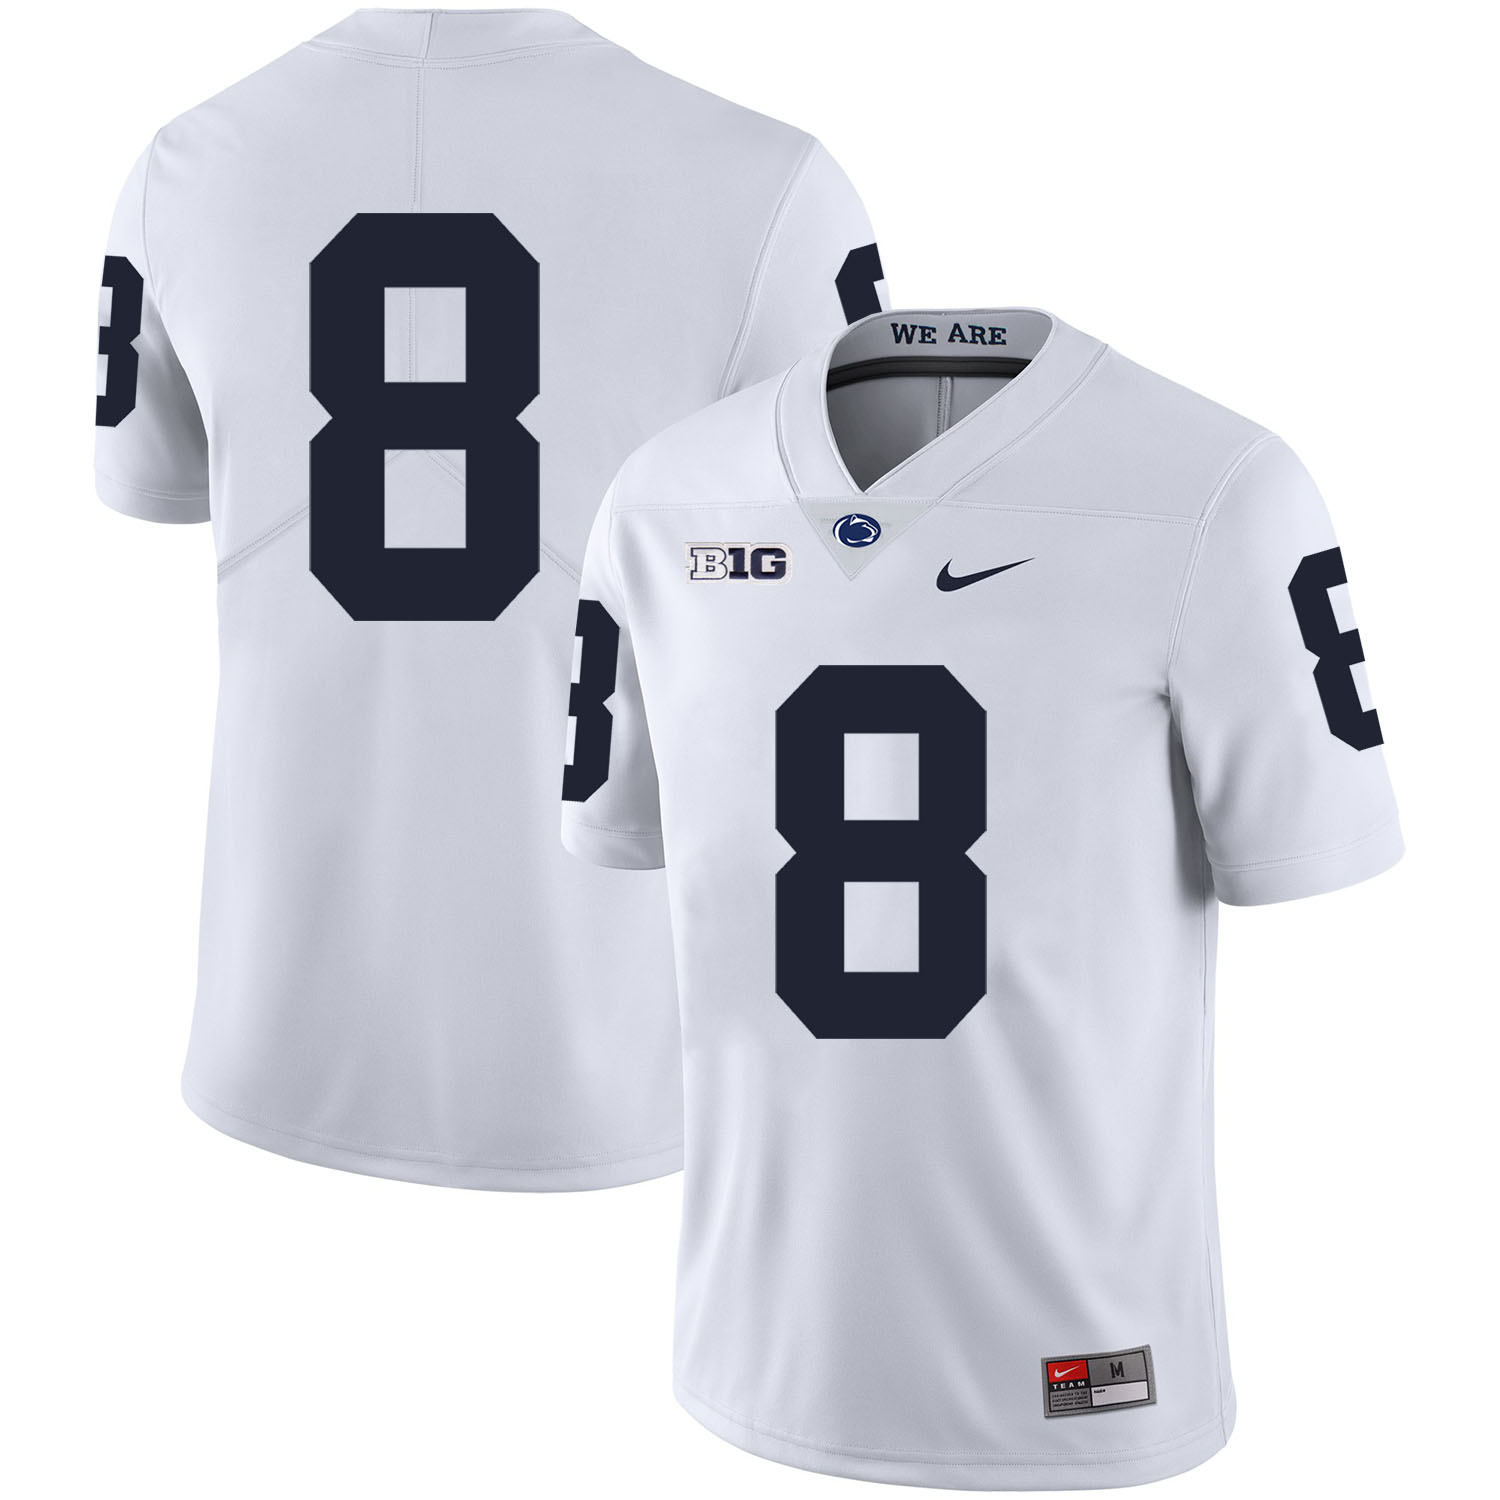 Penn State Nittany Lions 8 Allen Robinson White Nike College Football Jersey